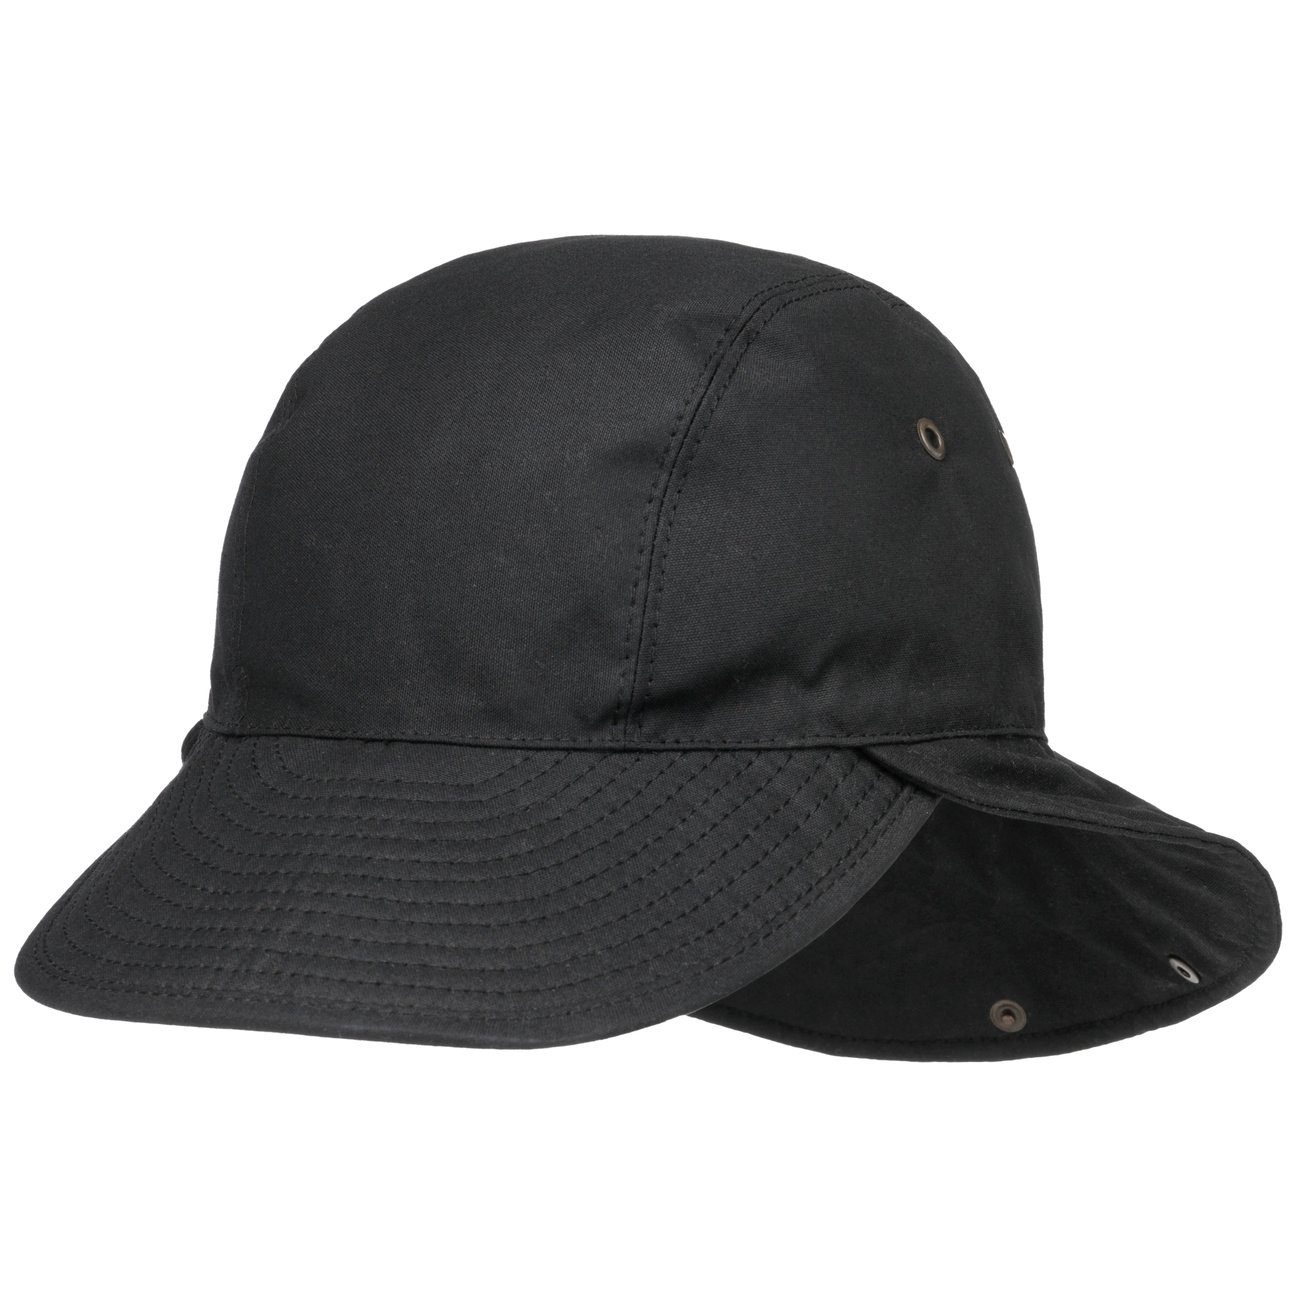 Lierys Baseball Cap (1-St) Basecap mit Schirm, Made in Italy